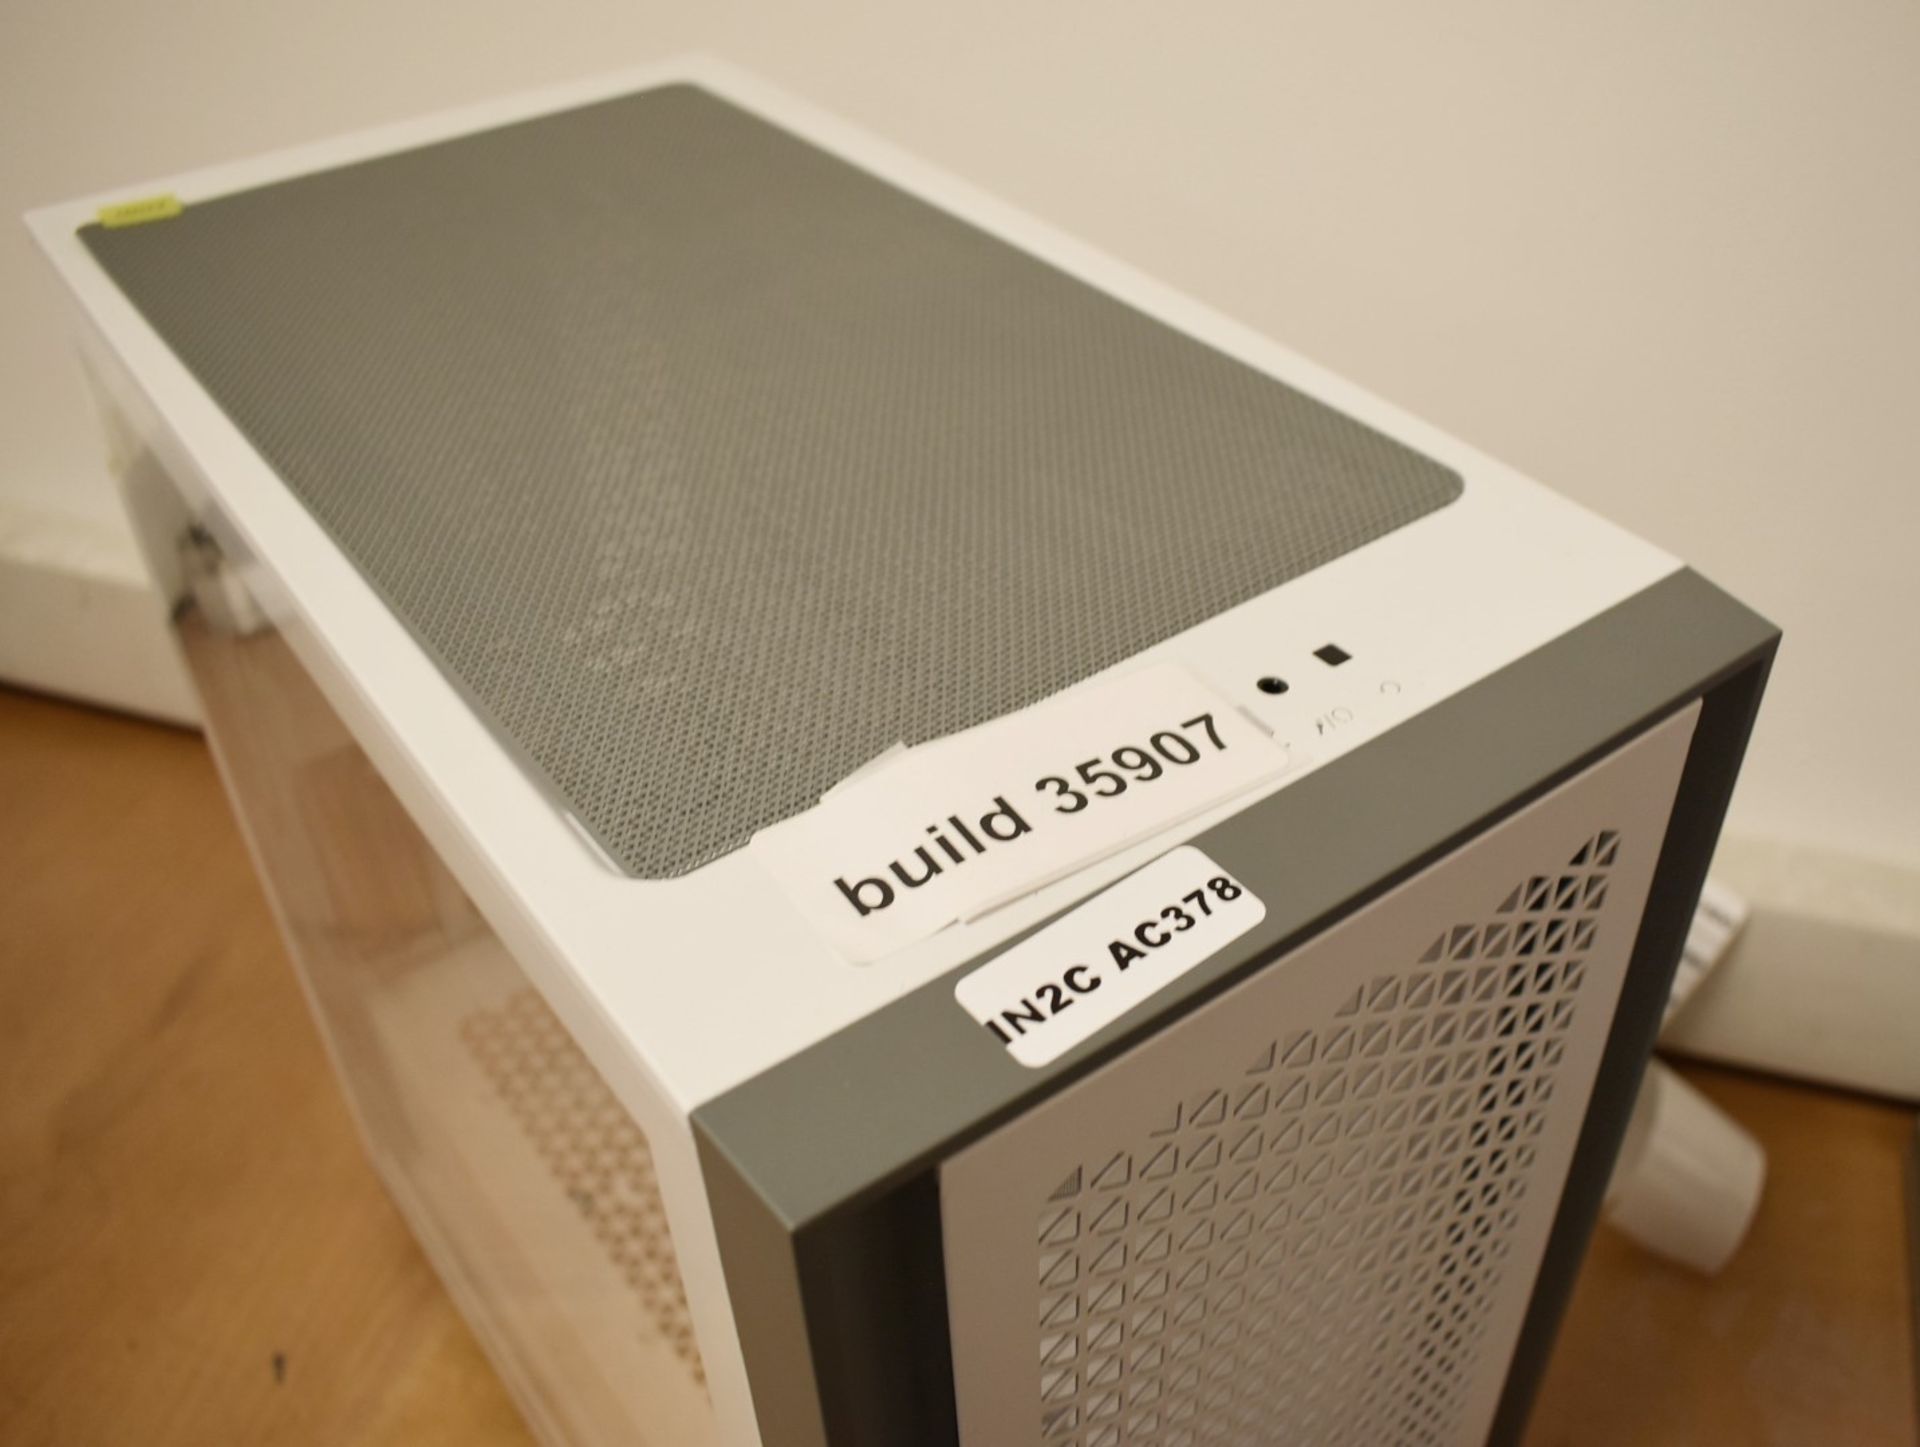 1 x Corsair Desktop PC Gaming Case With Tempered Glass Side Panel - Artic White Finish - Unboxed - Image 3 of 7